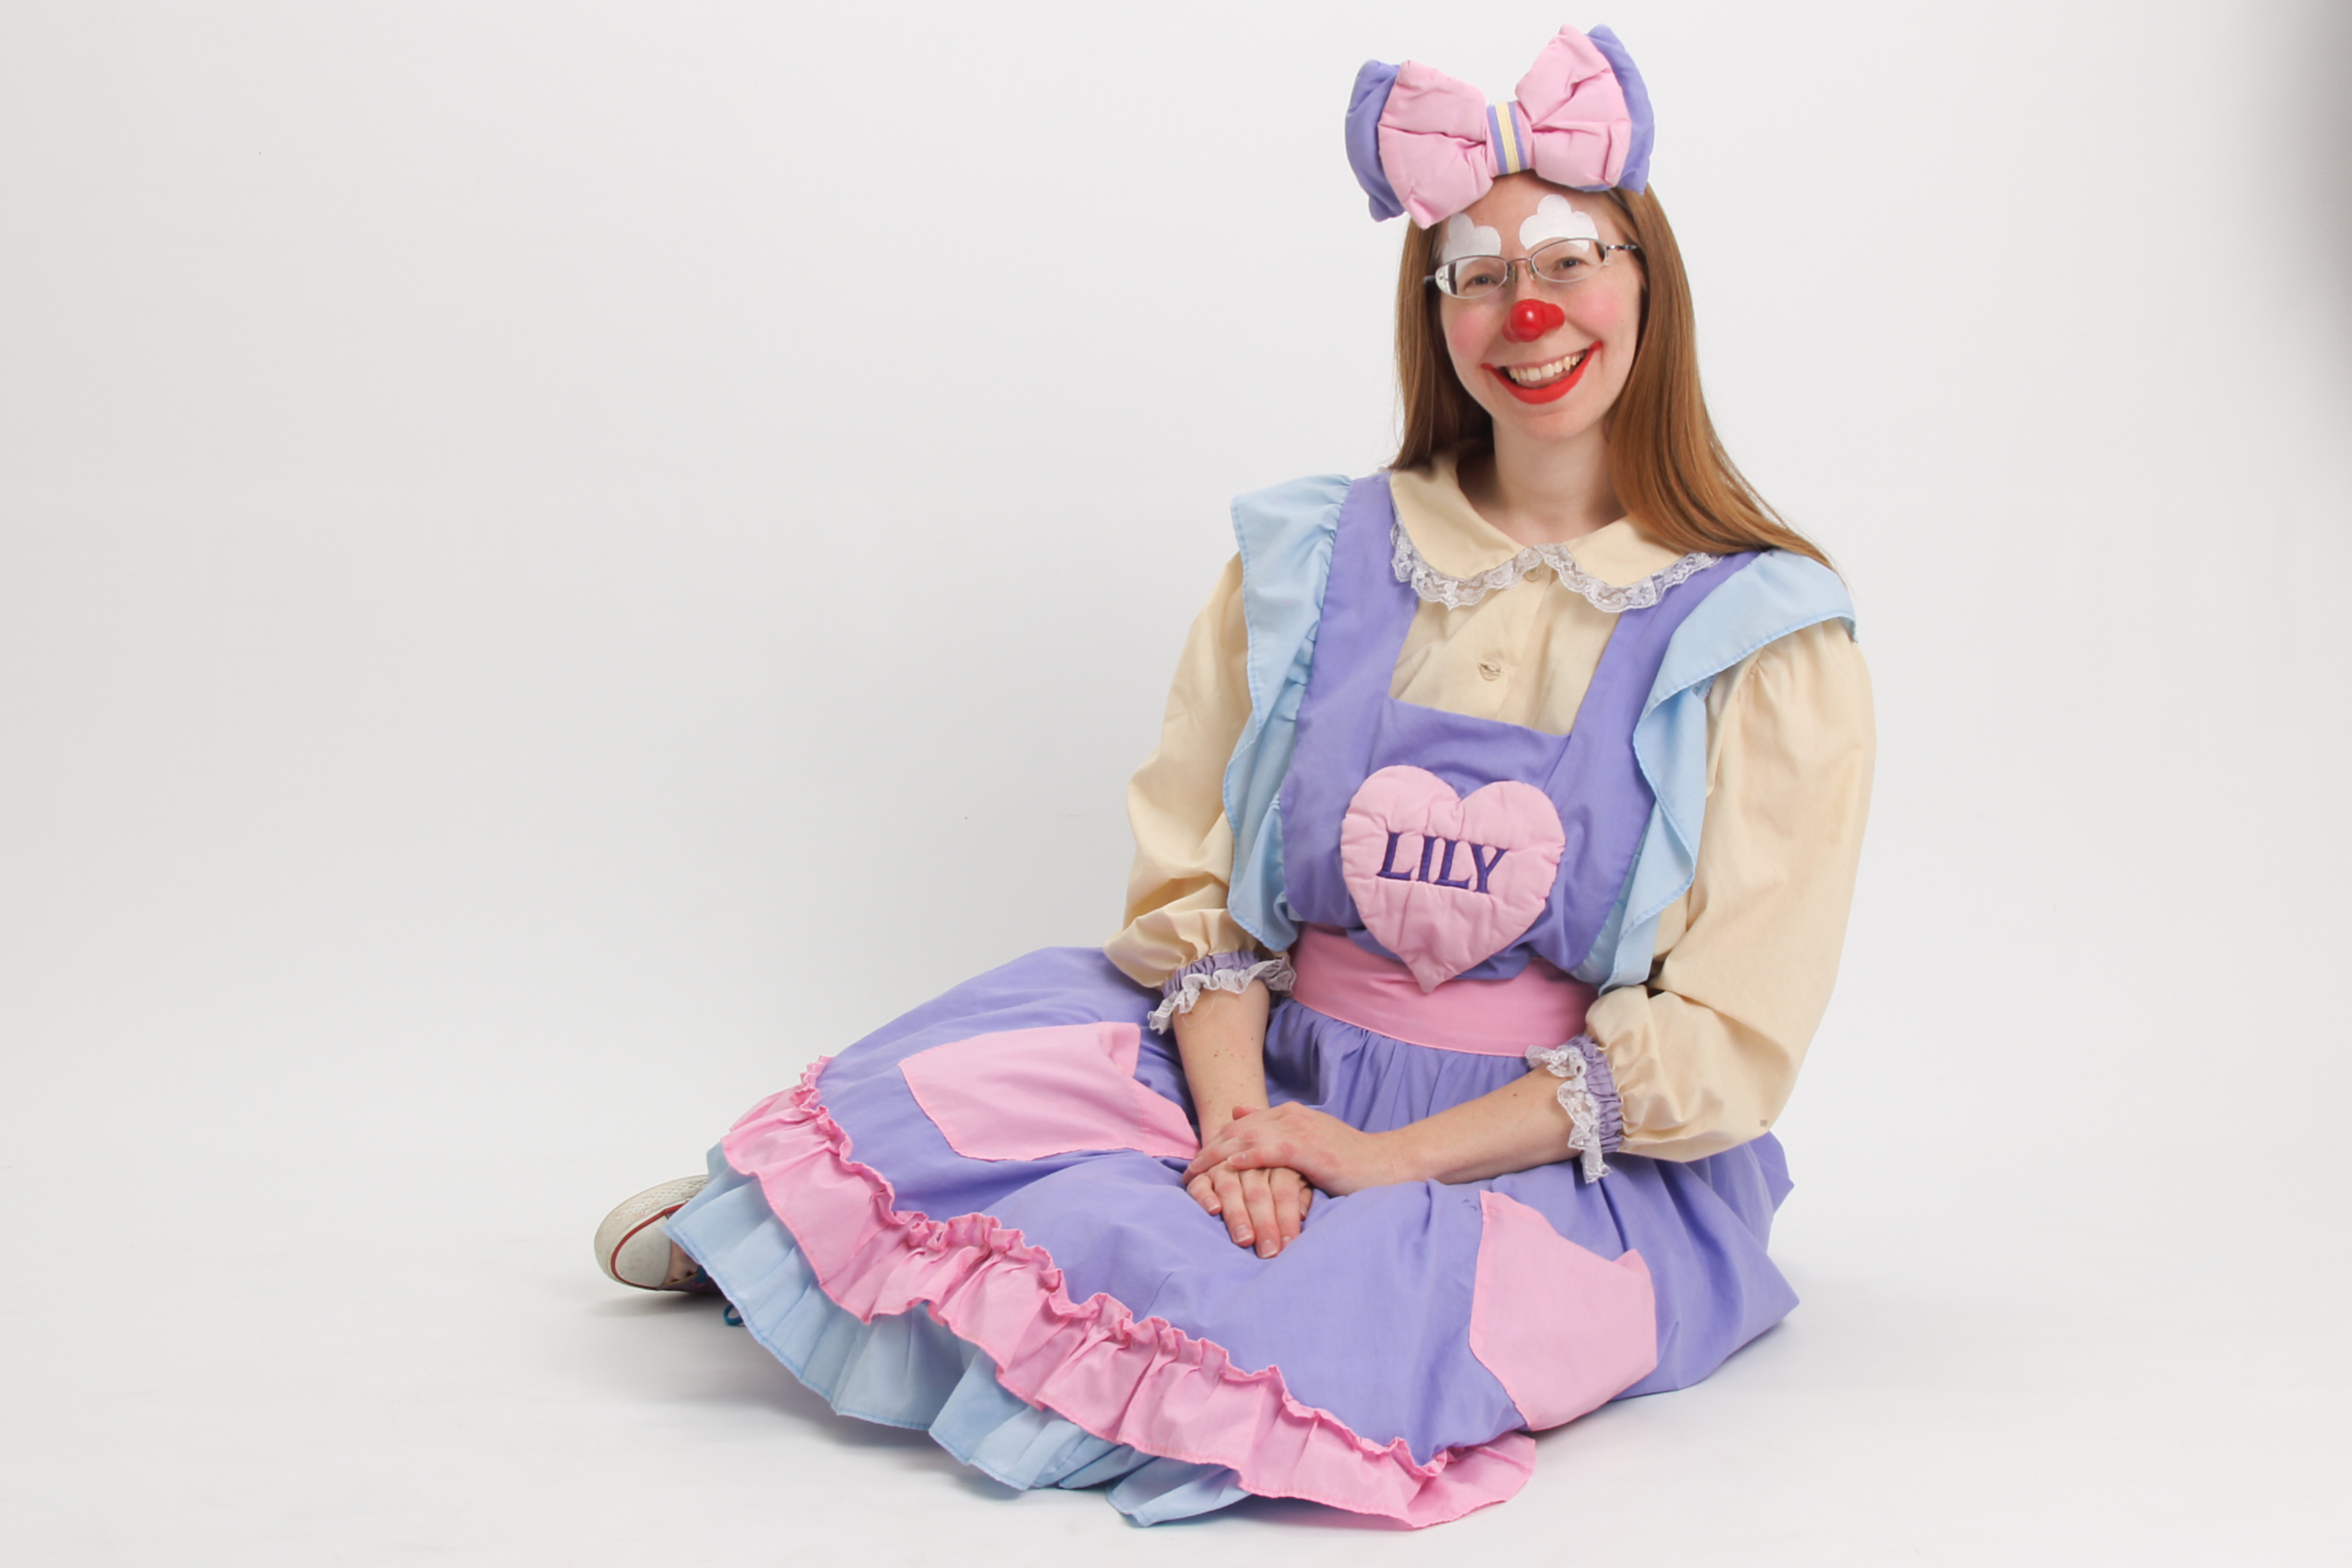 Children love Lily the Clown for birthday parties